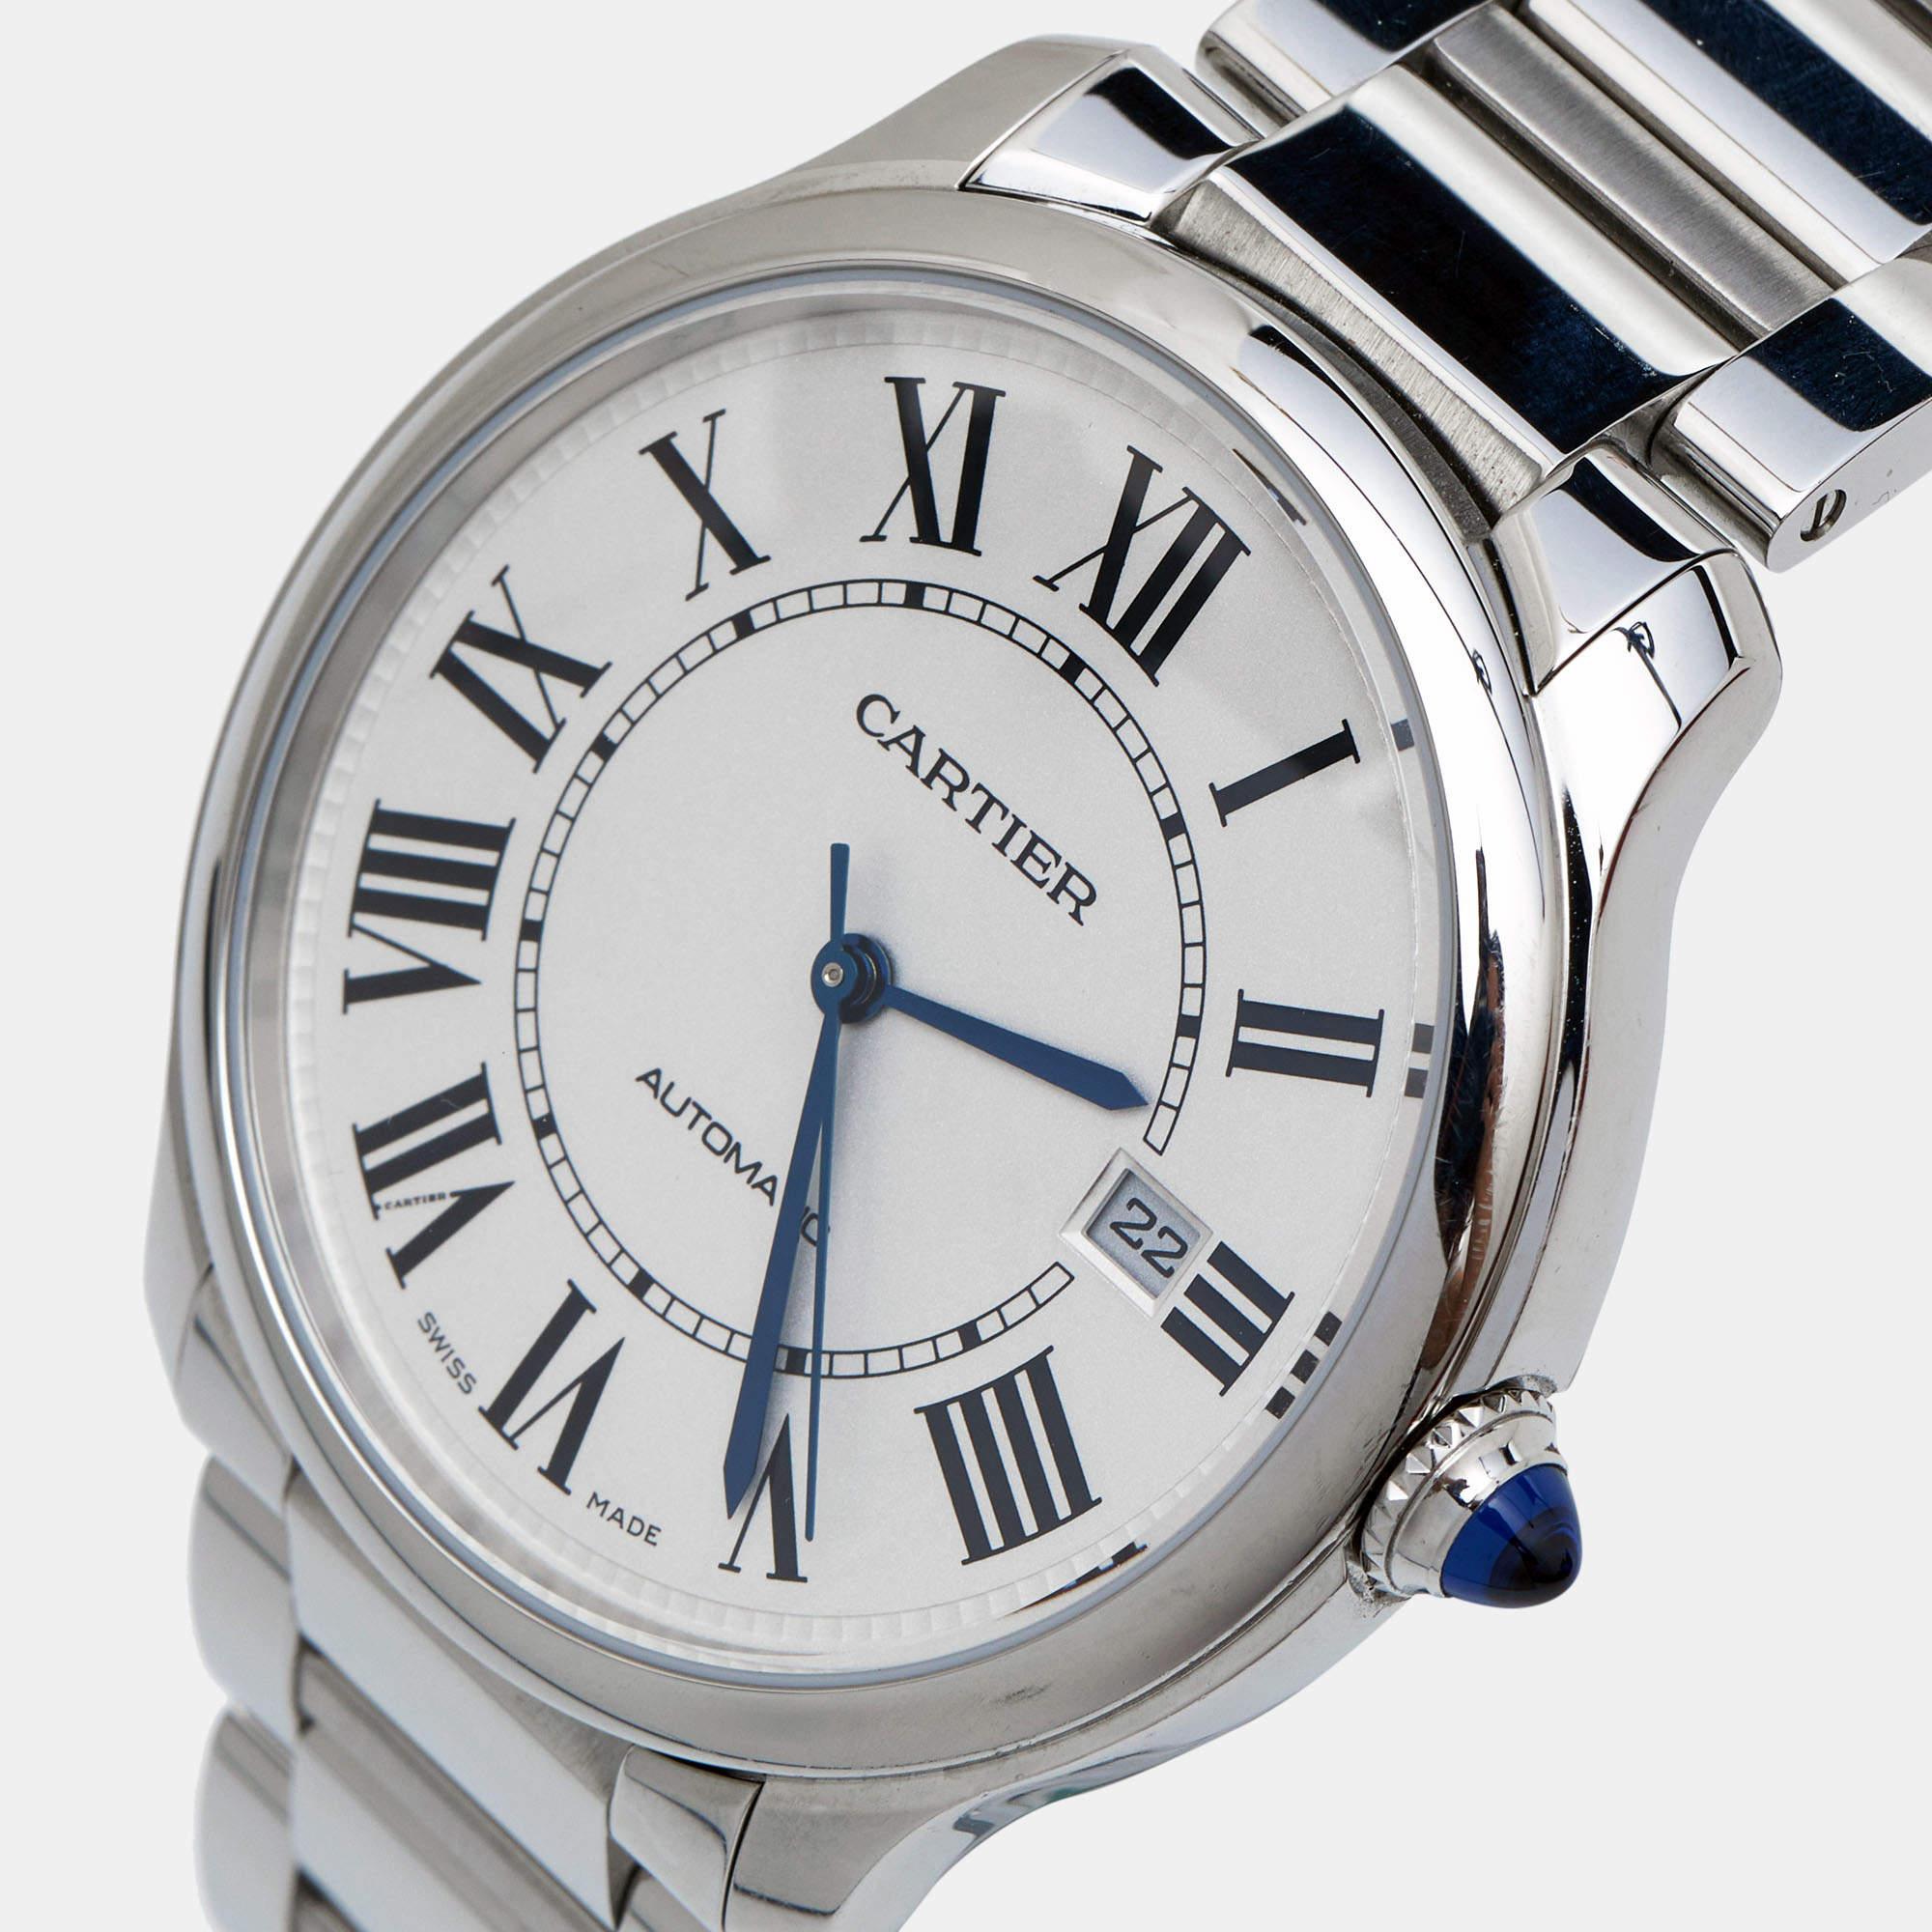 The Cartier Ronde Must WSRN0035 watch is a luxurious timepiece that exudes elegance and sophistication. This wristwatch features a sleek stainless steel case with a silver finish, enhancing its timeless appeal. The minimalist silver dial showcases